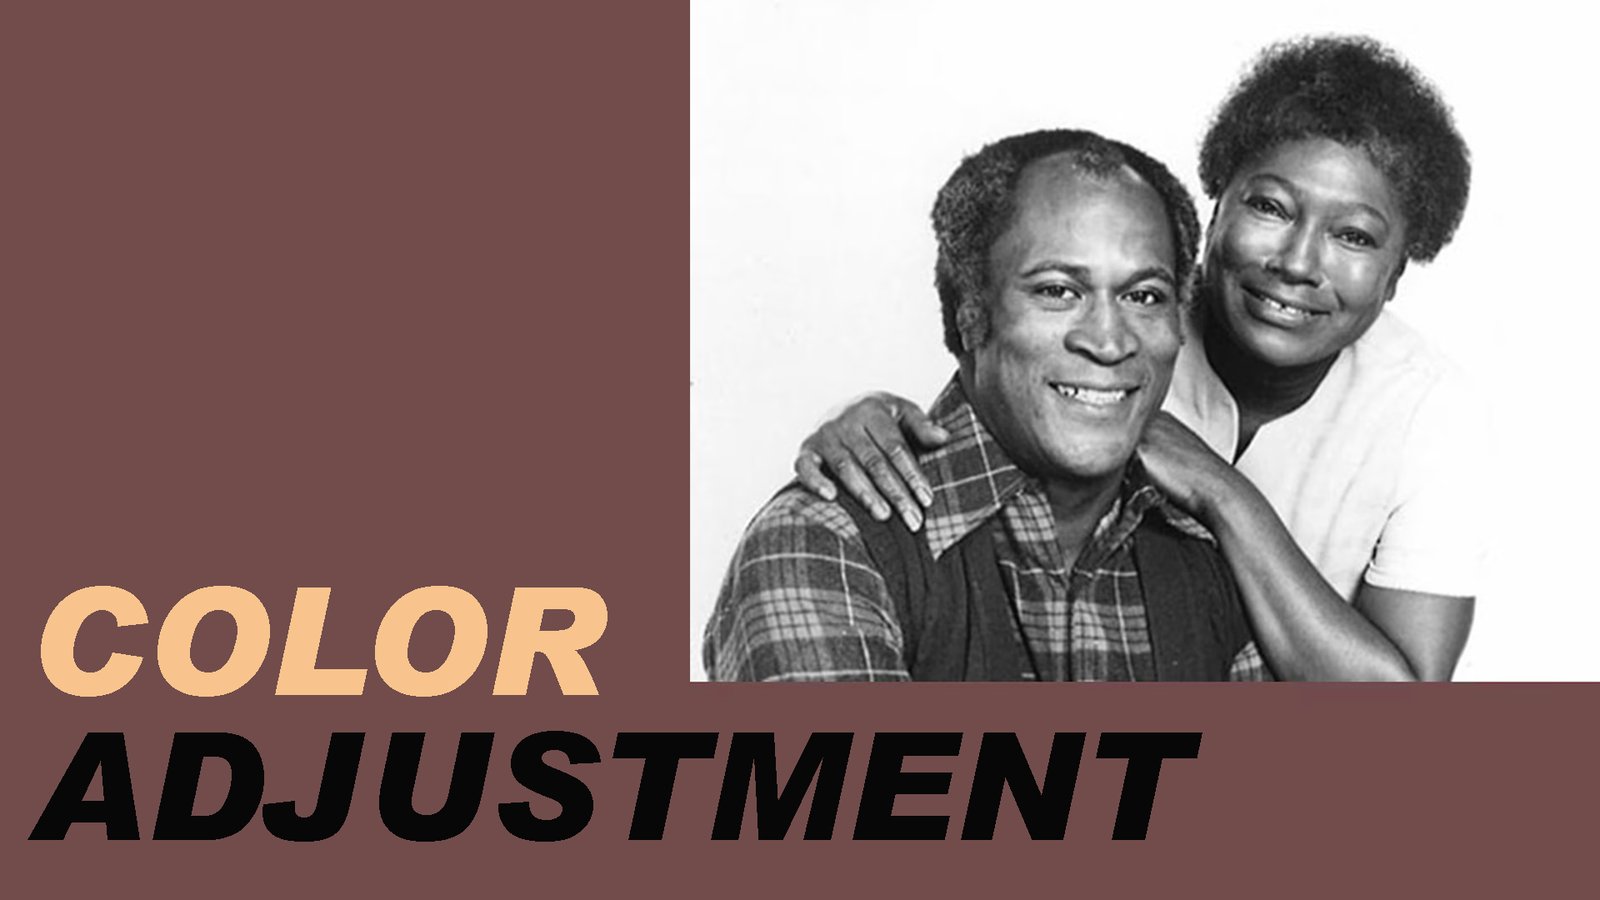 Color Adjustment - A History of African American Portrayal on Television